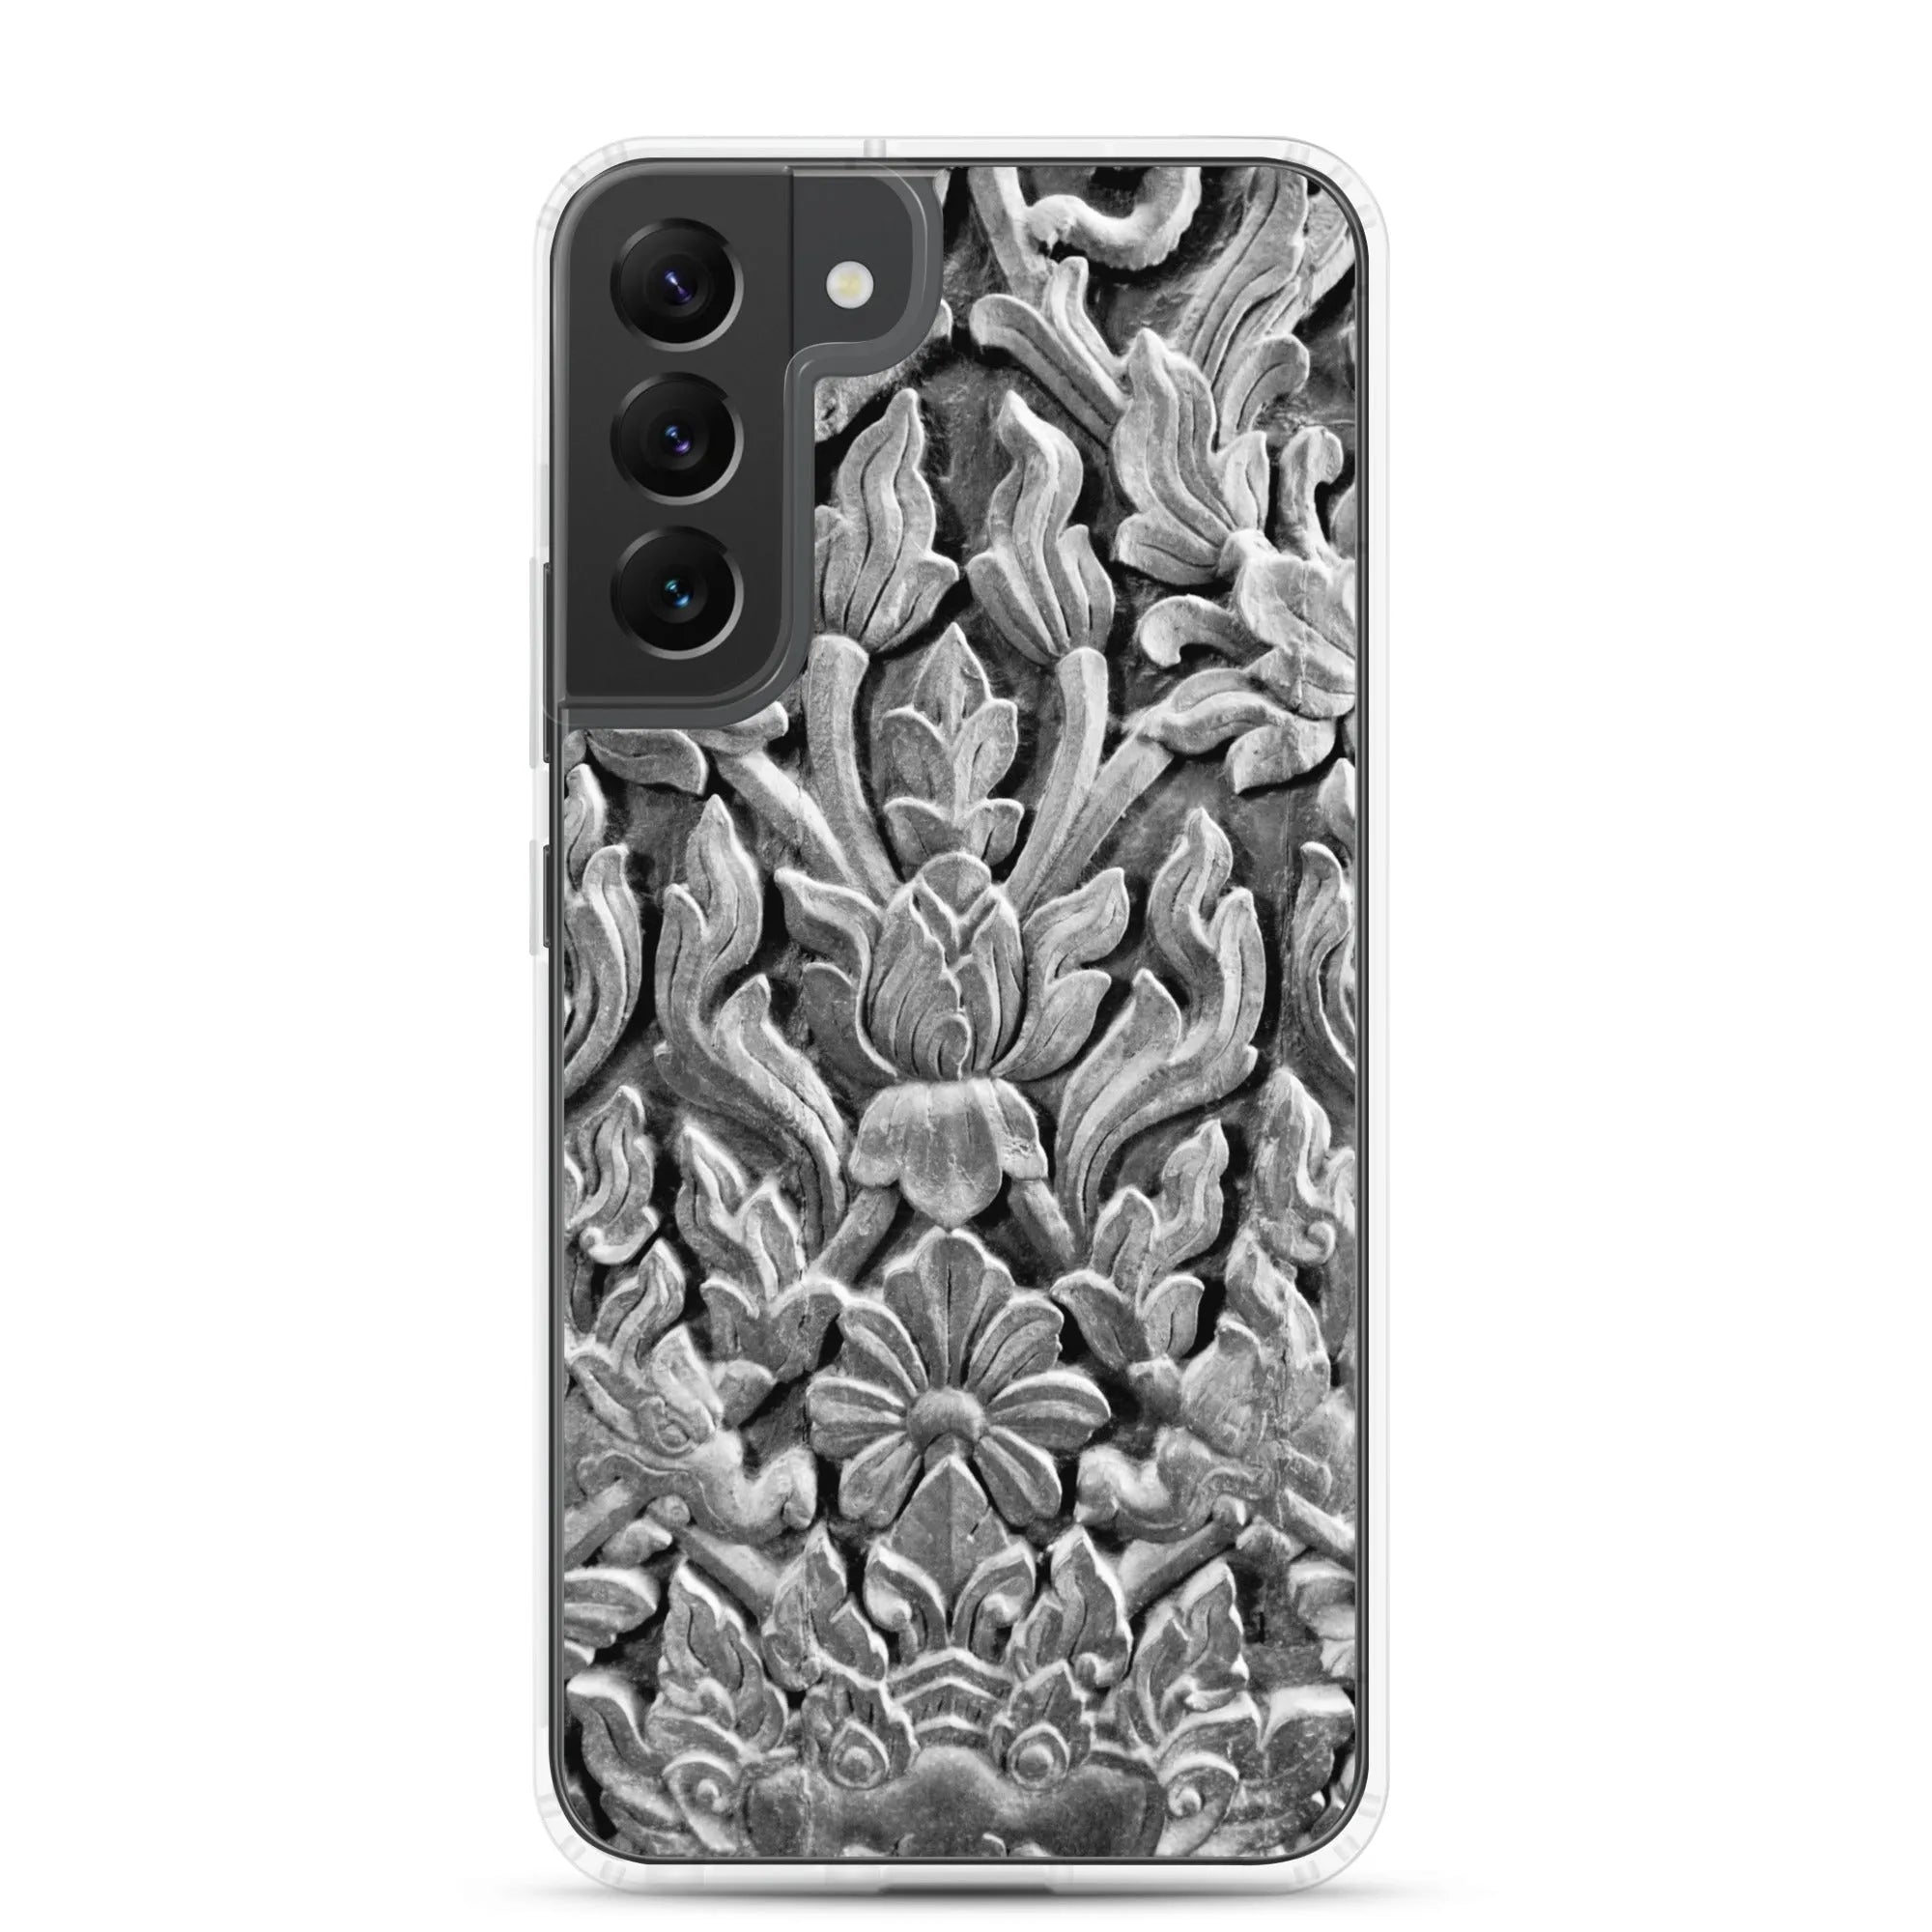 Dragon’s Den Samsung Galaxy Case - Black And White - Samsung Galaxy S22 Plus - Mobile Phone Cases - Aesthetic Art